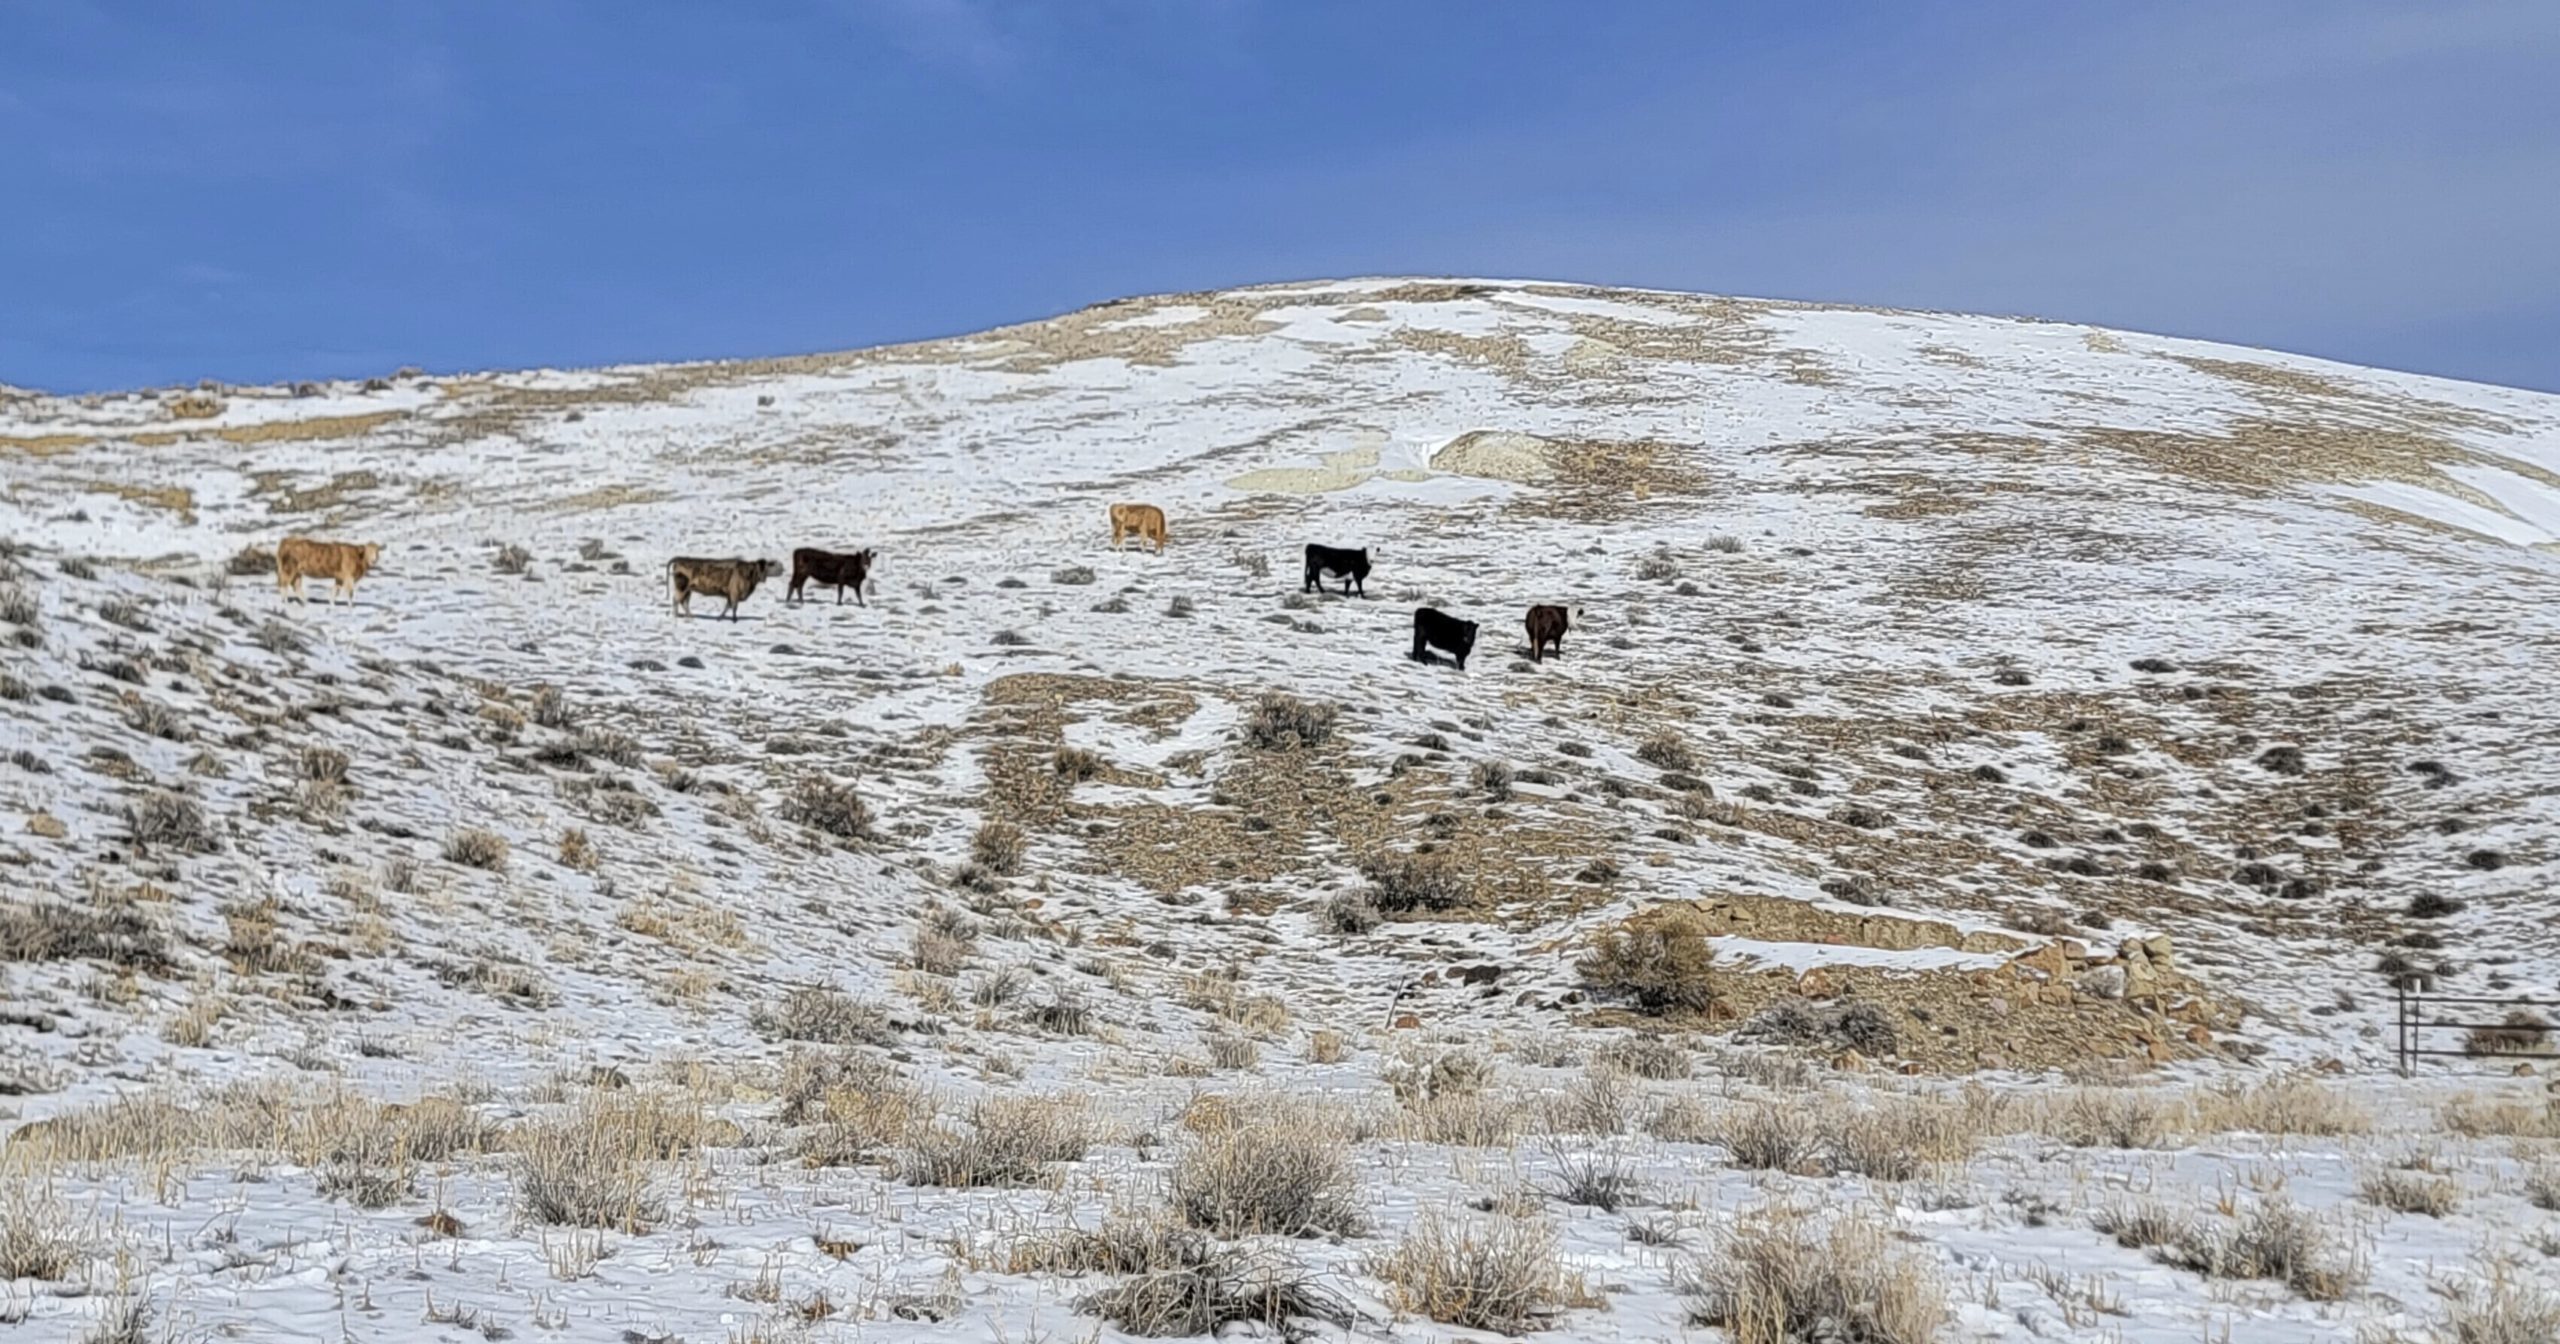 This photo provided by the Center for Biological Diversity shows seven cows seen within subpopulation 1 of Tiehm's buckwheat at Rhyolite Ridge in the Silver Peak Range of Esmeralda County, Nevada, on January 3, 2023.